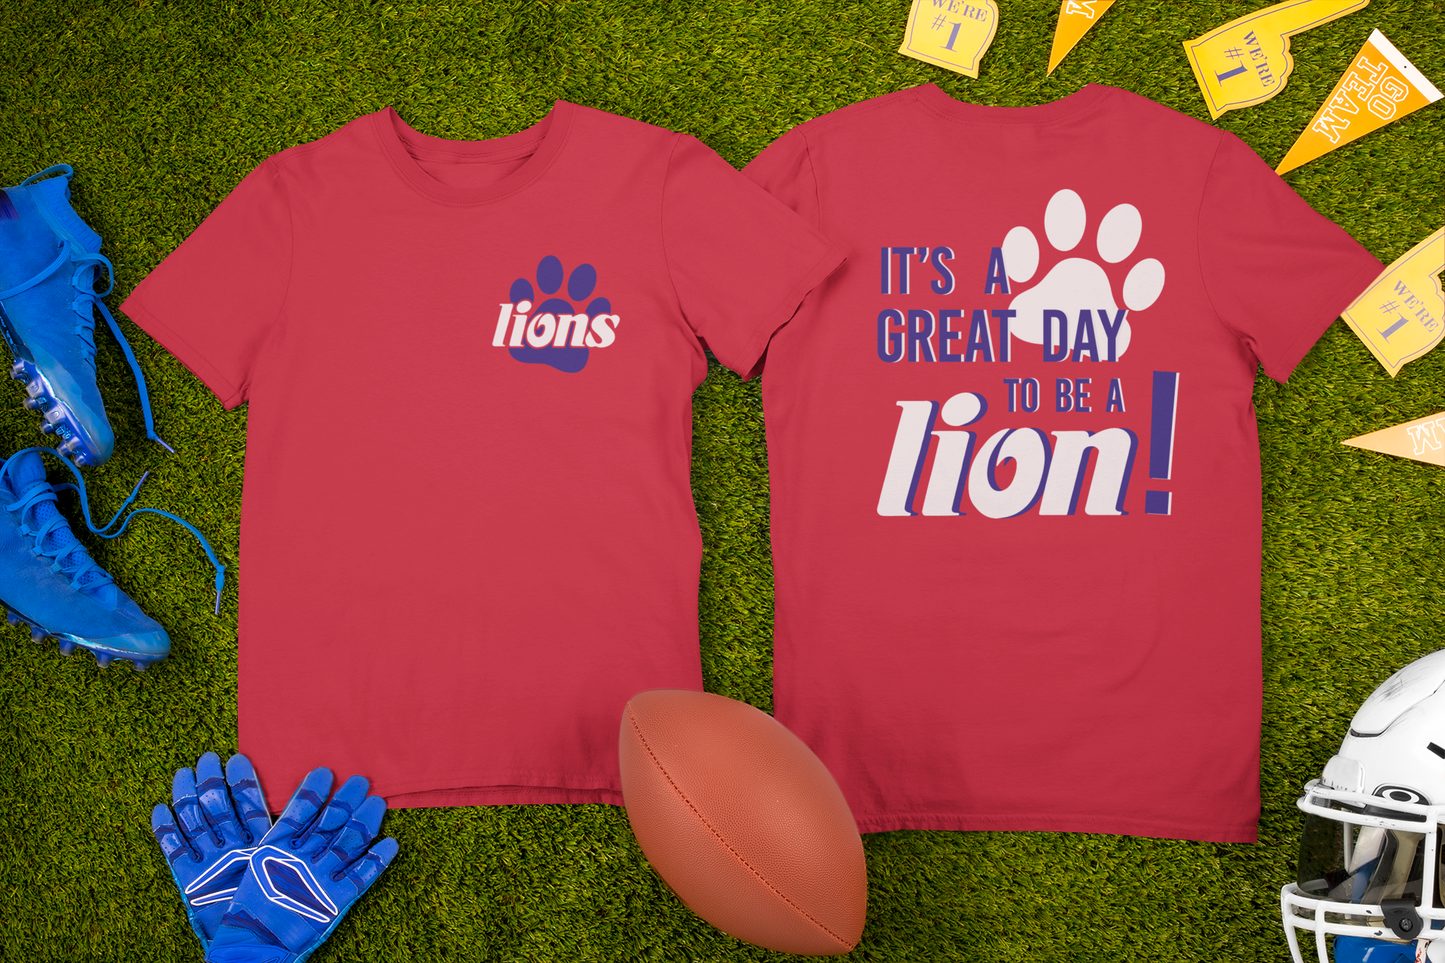 Little Lions - Great Day to be a Lion!